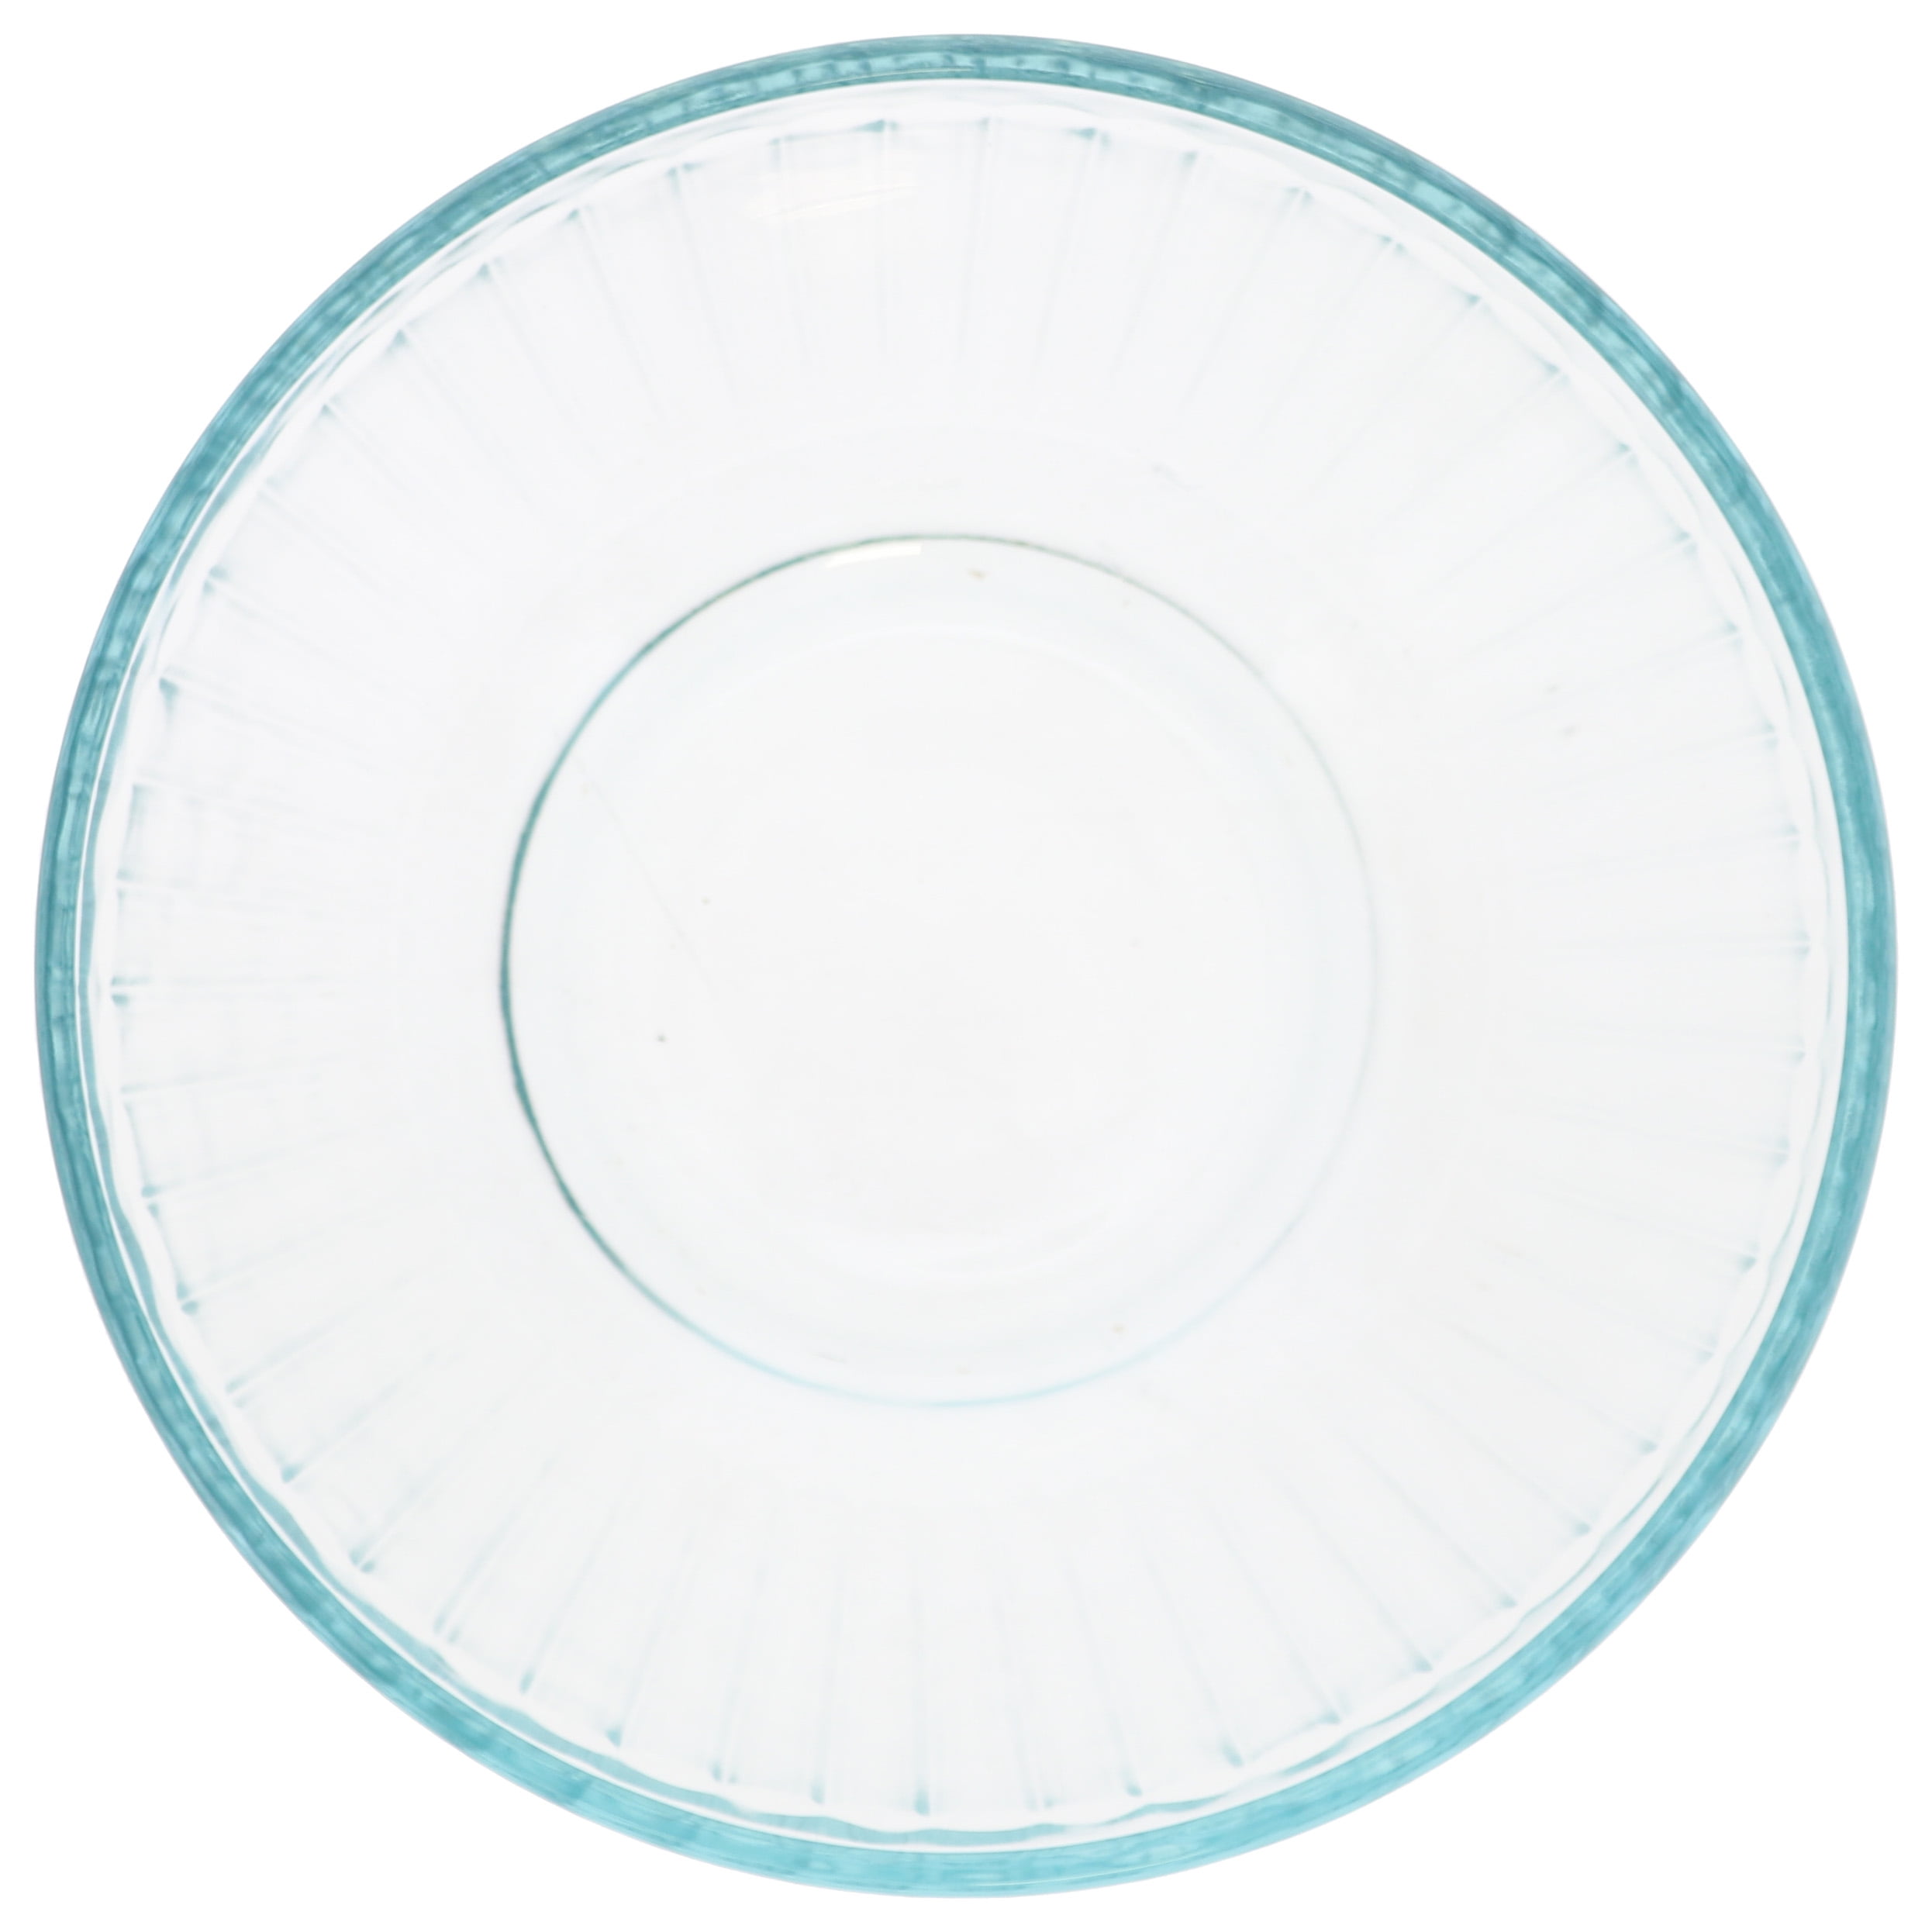 Pyrex 7402 6-Cup Sculpted Glass Mixing Bowl and 7402-PC Blue Spruce Plastic Lid (2-Pack)